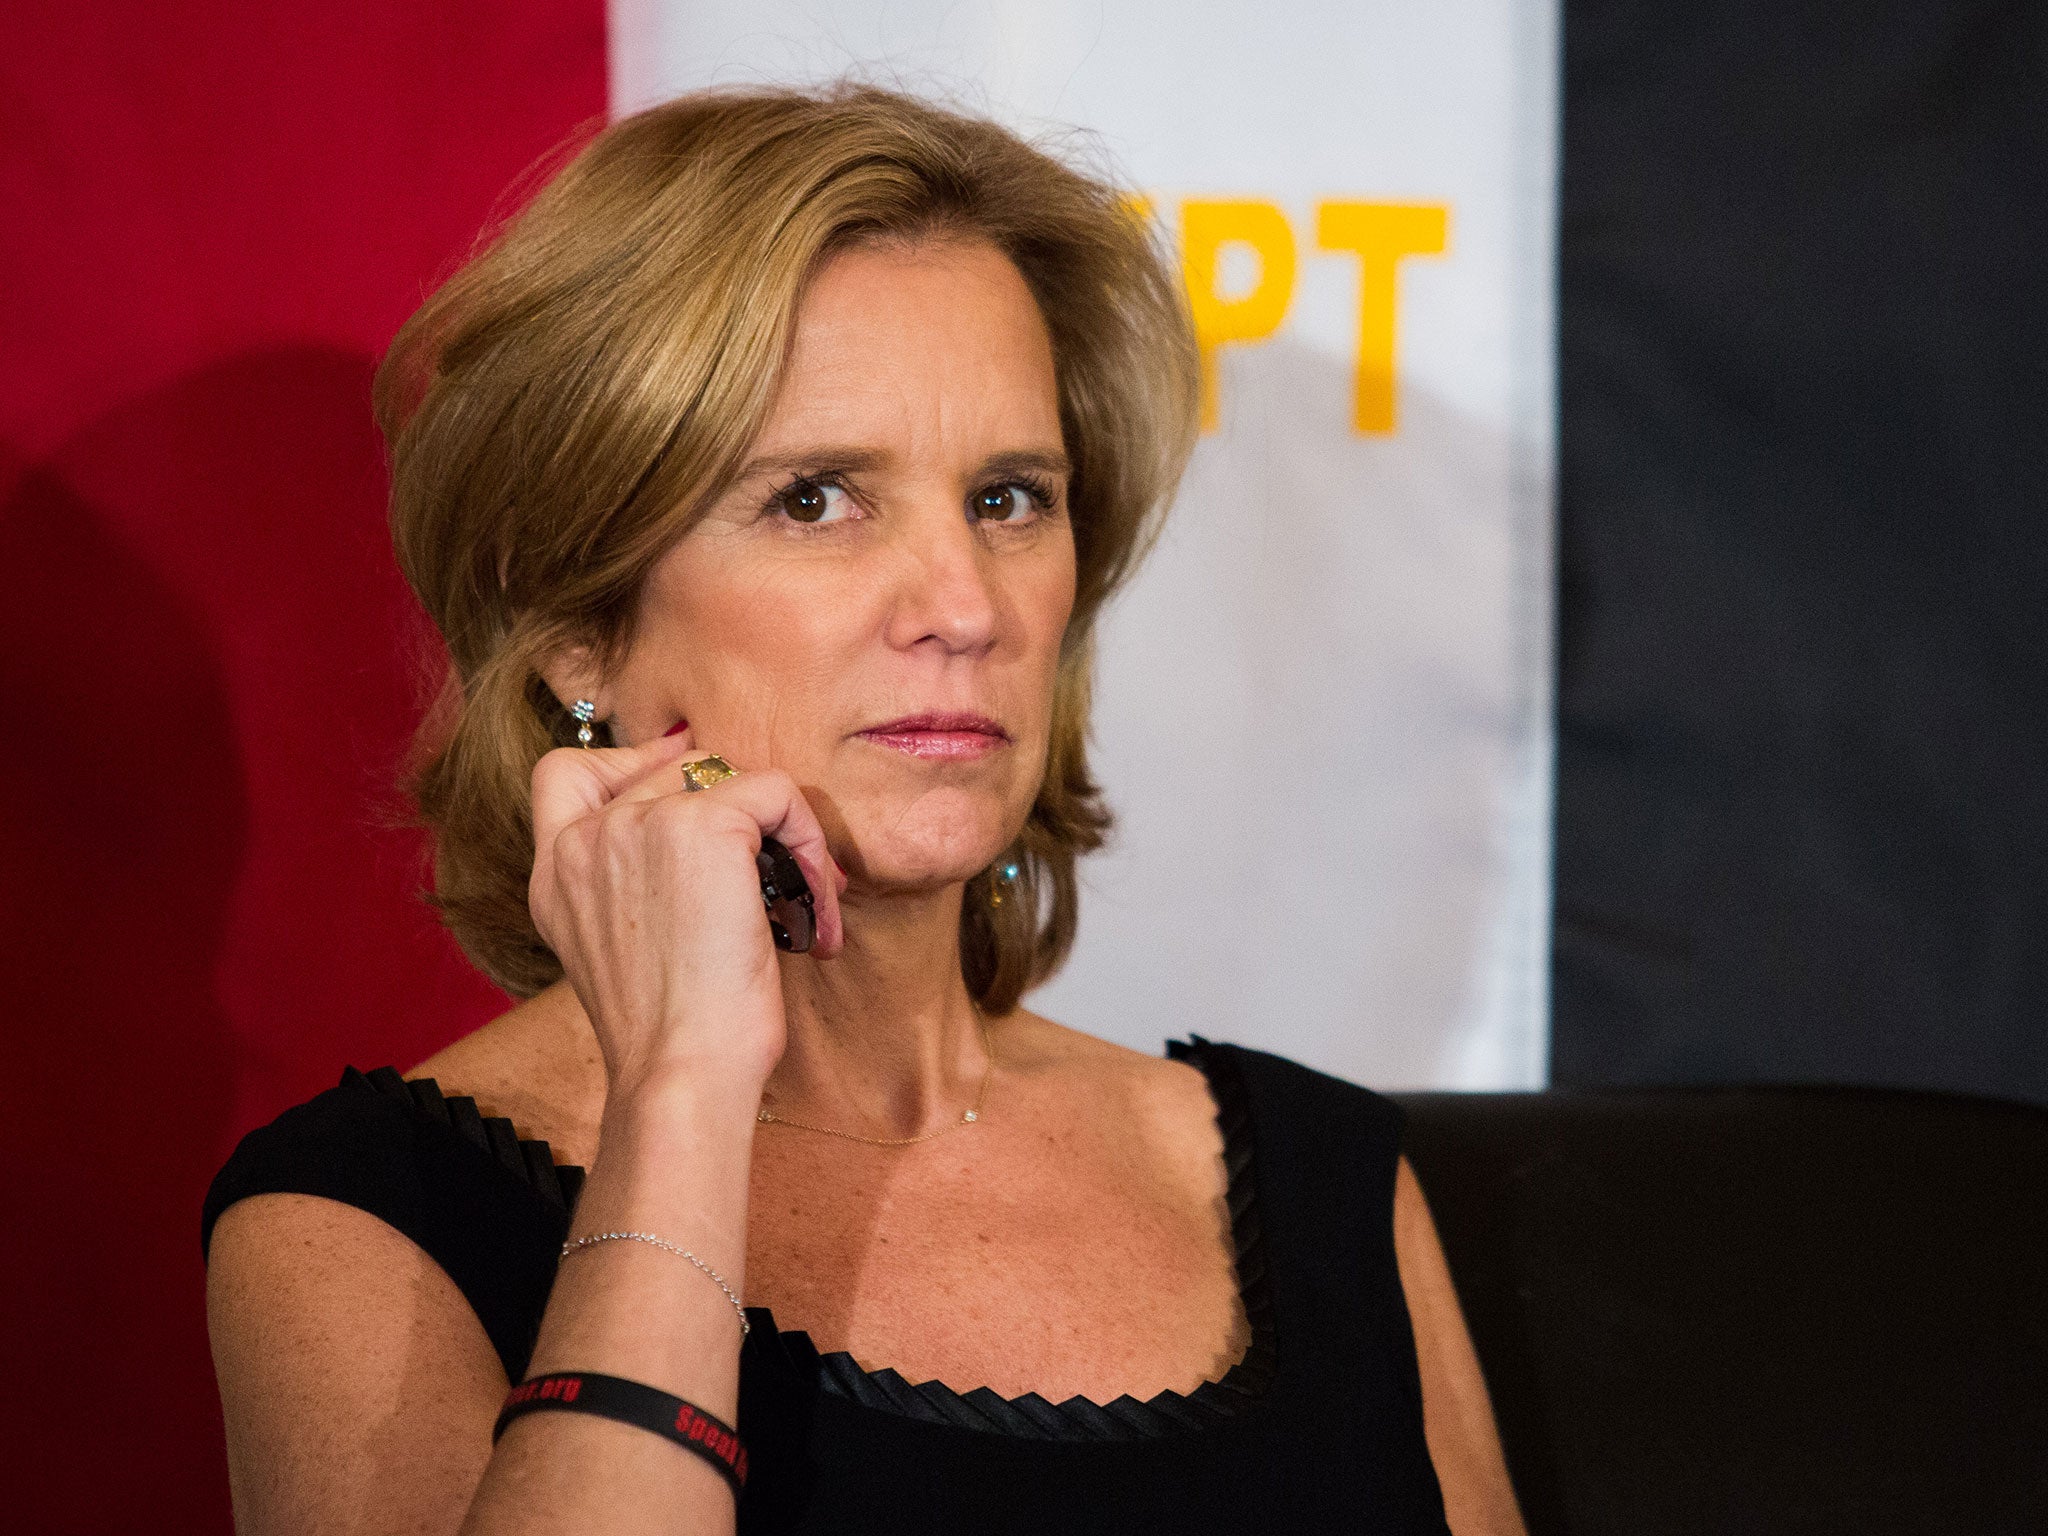 Kerry Kennedy has responded to Rowling’s views on transgender people